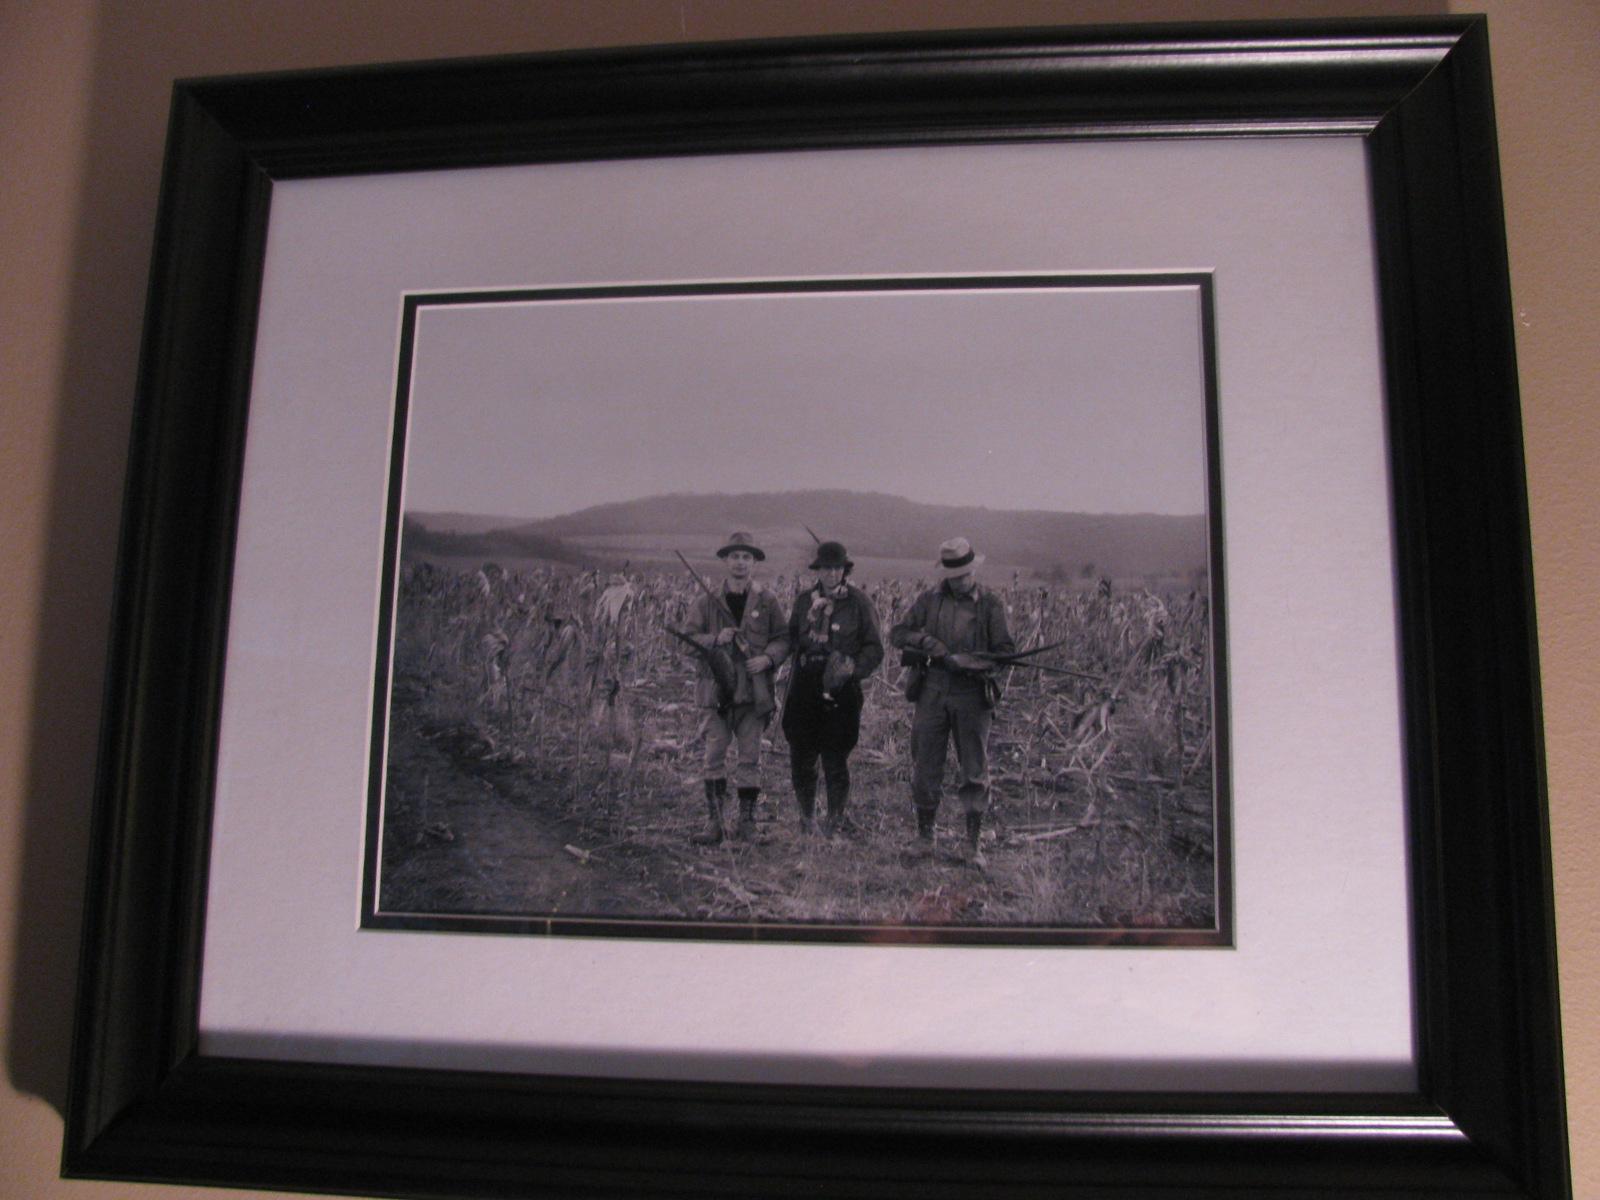 One of a kind photo depicting hunters in New Jersey during the depression. Two men and a woman which is a rare combination. Photo size is 14 x 11. In excellent condition with minimal wear on frame.